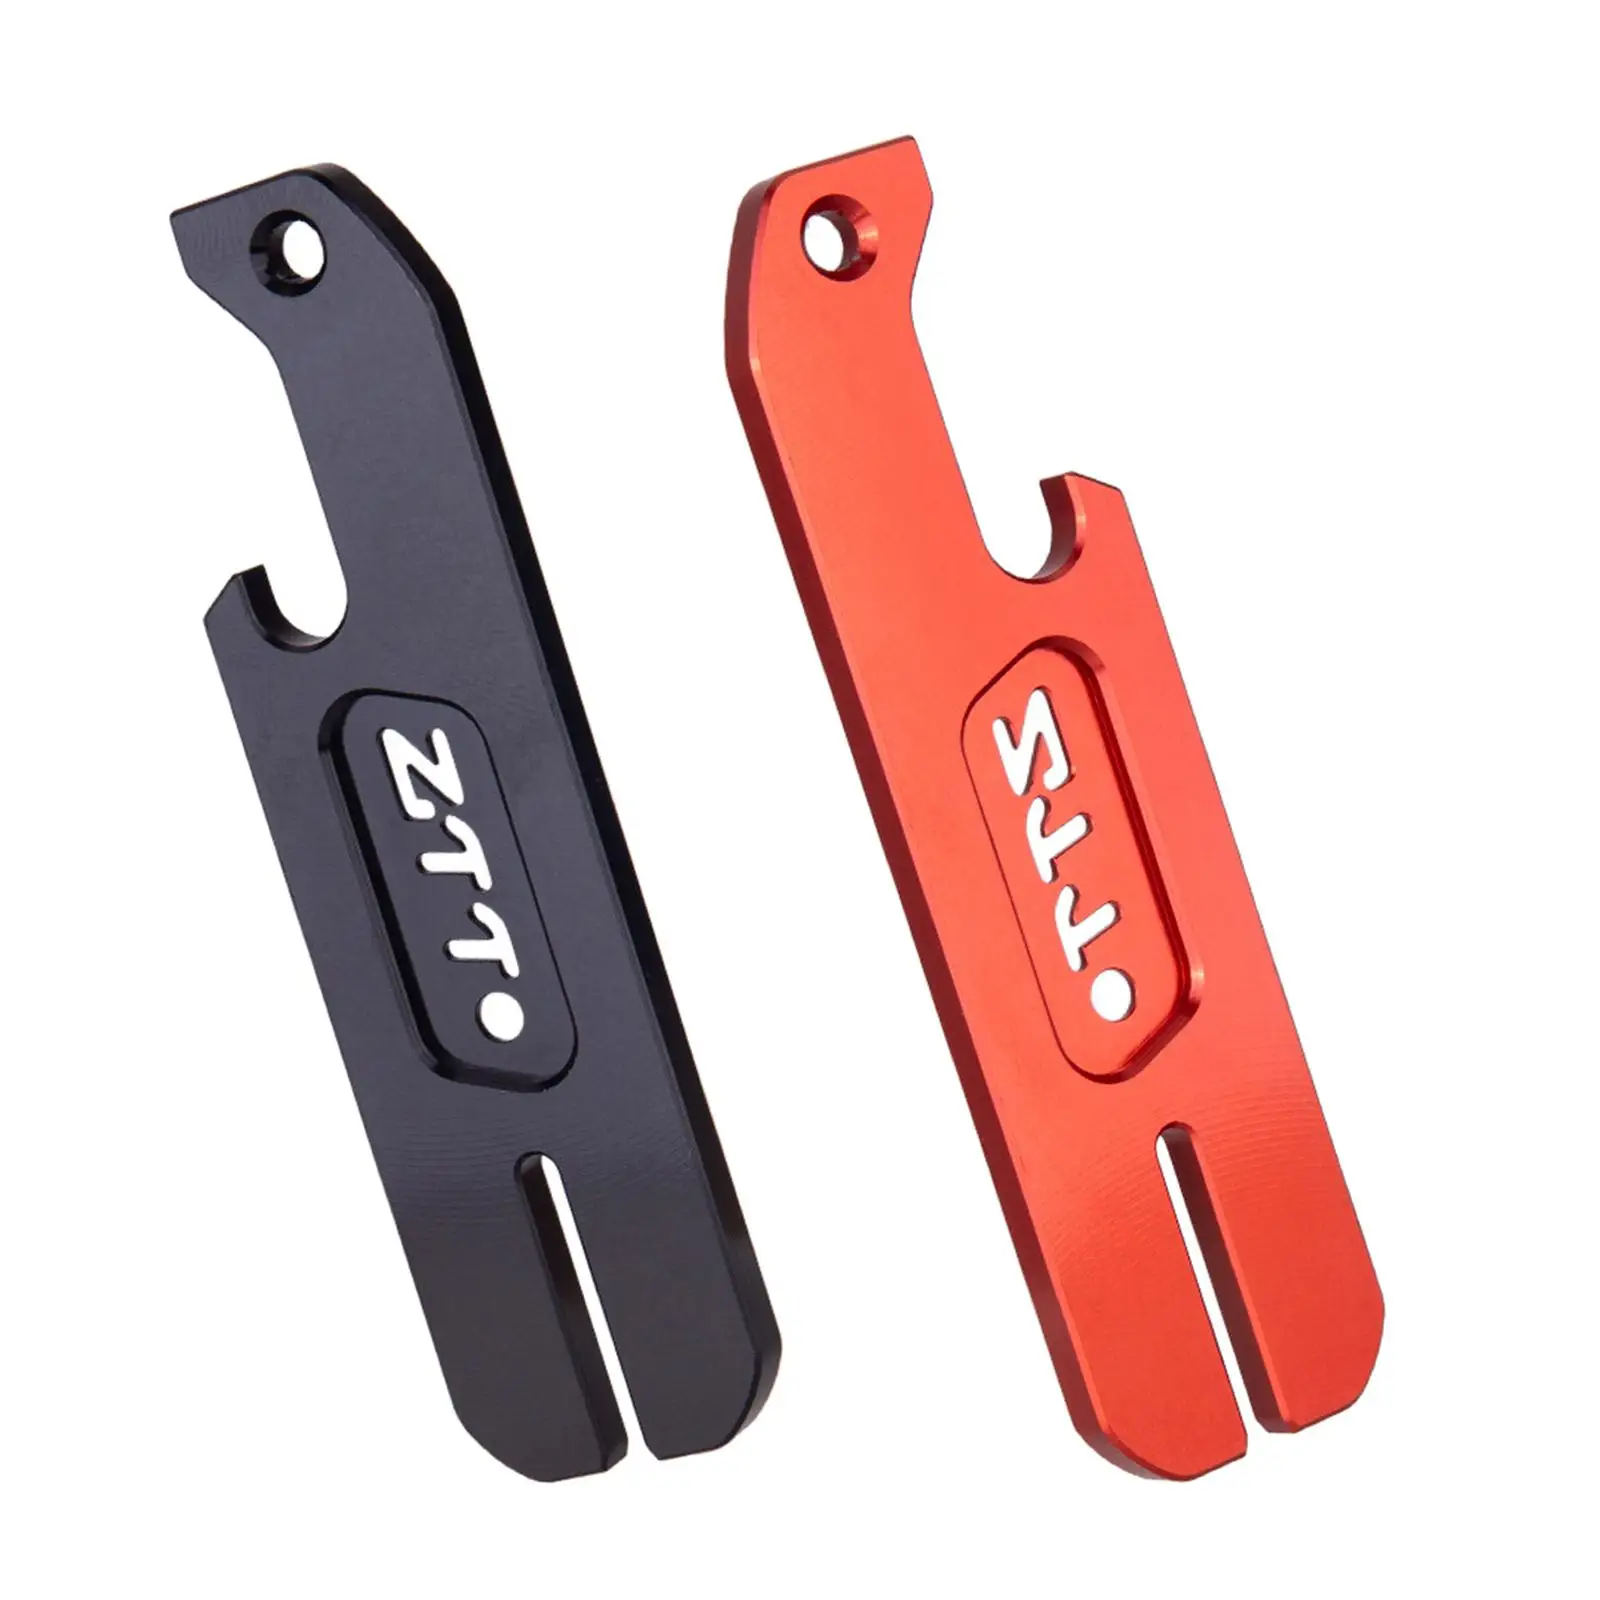 Disc Rotor Truing Wrench Aluminium Alloy Lightweight Cycle Disc Brake Truing Wrench Spanner  Tool